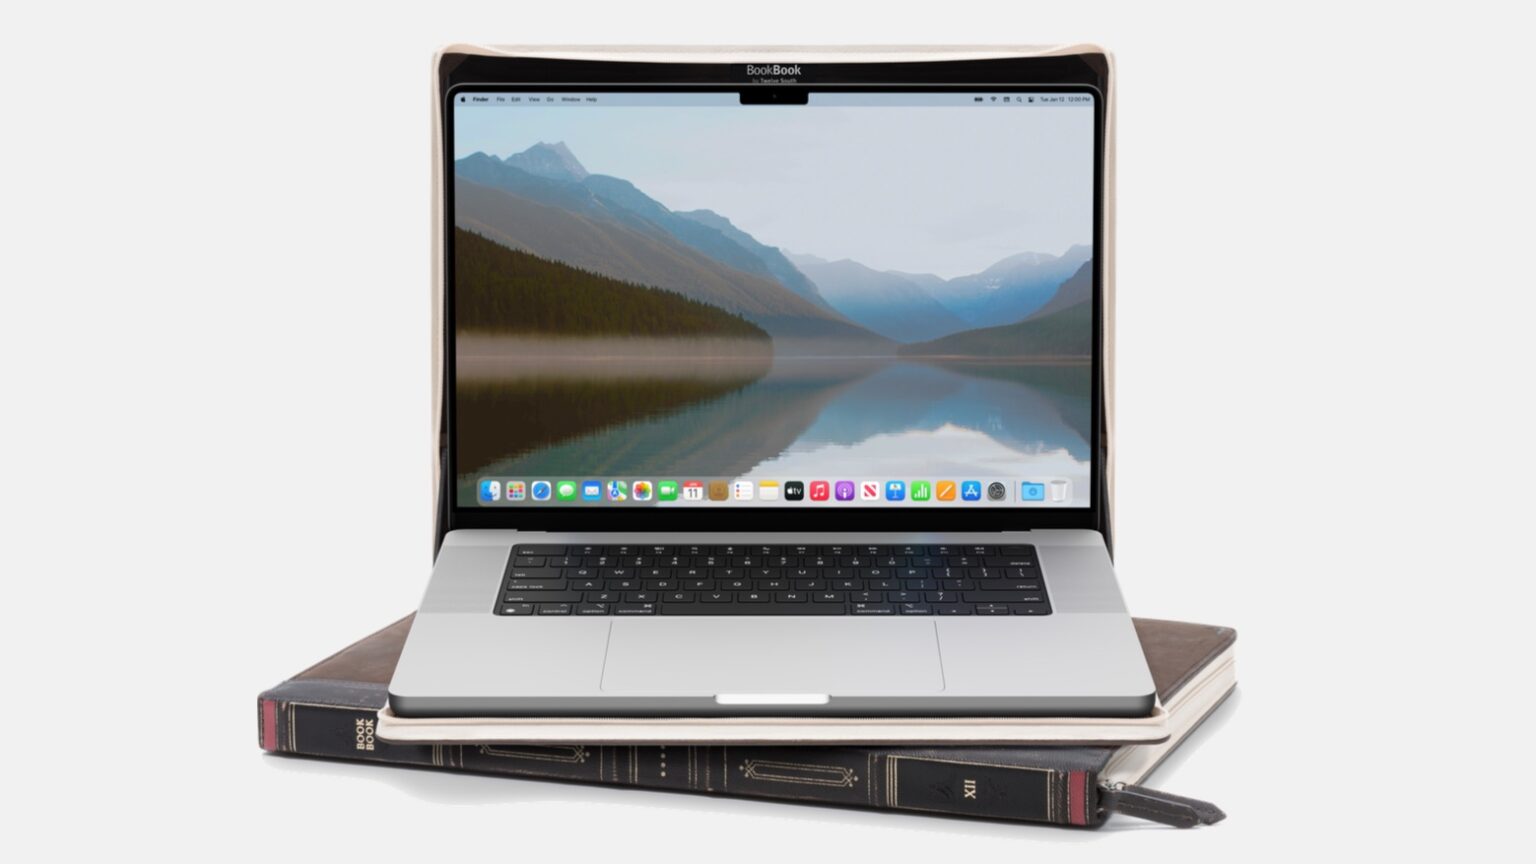 Give your MacBook Pro some old-world charm with leather BookBook case